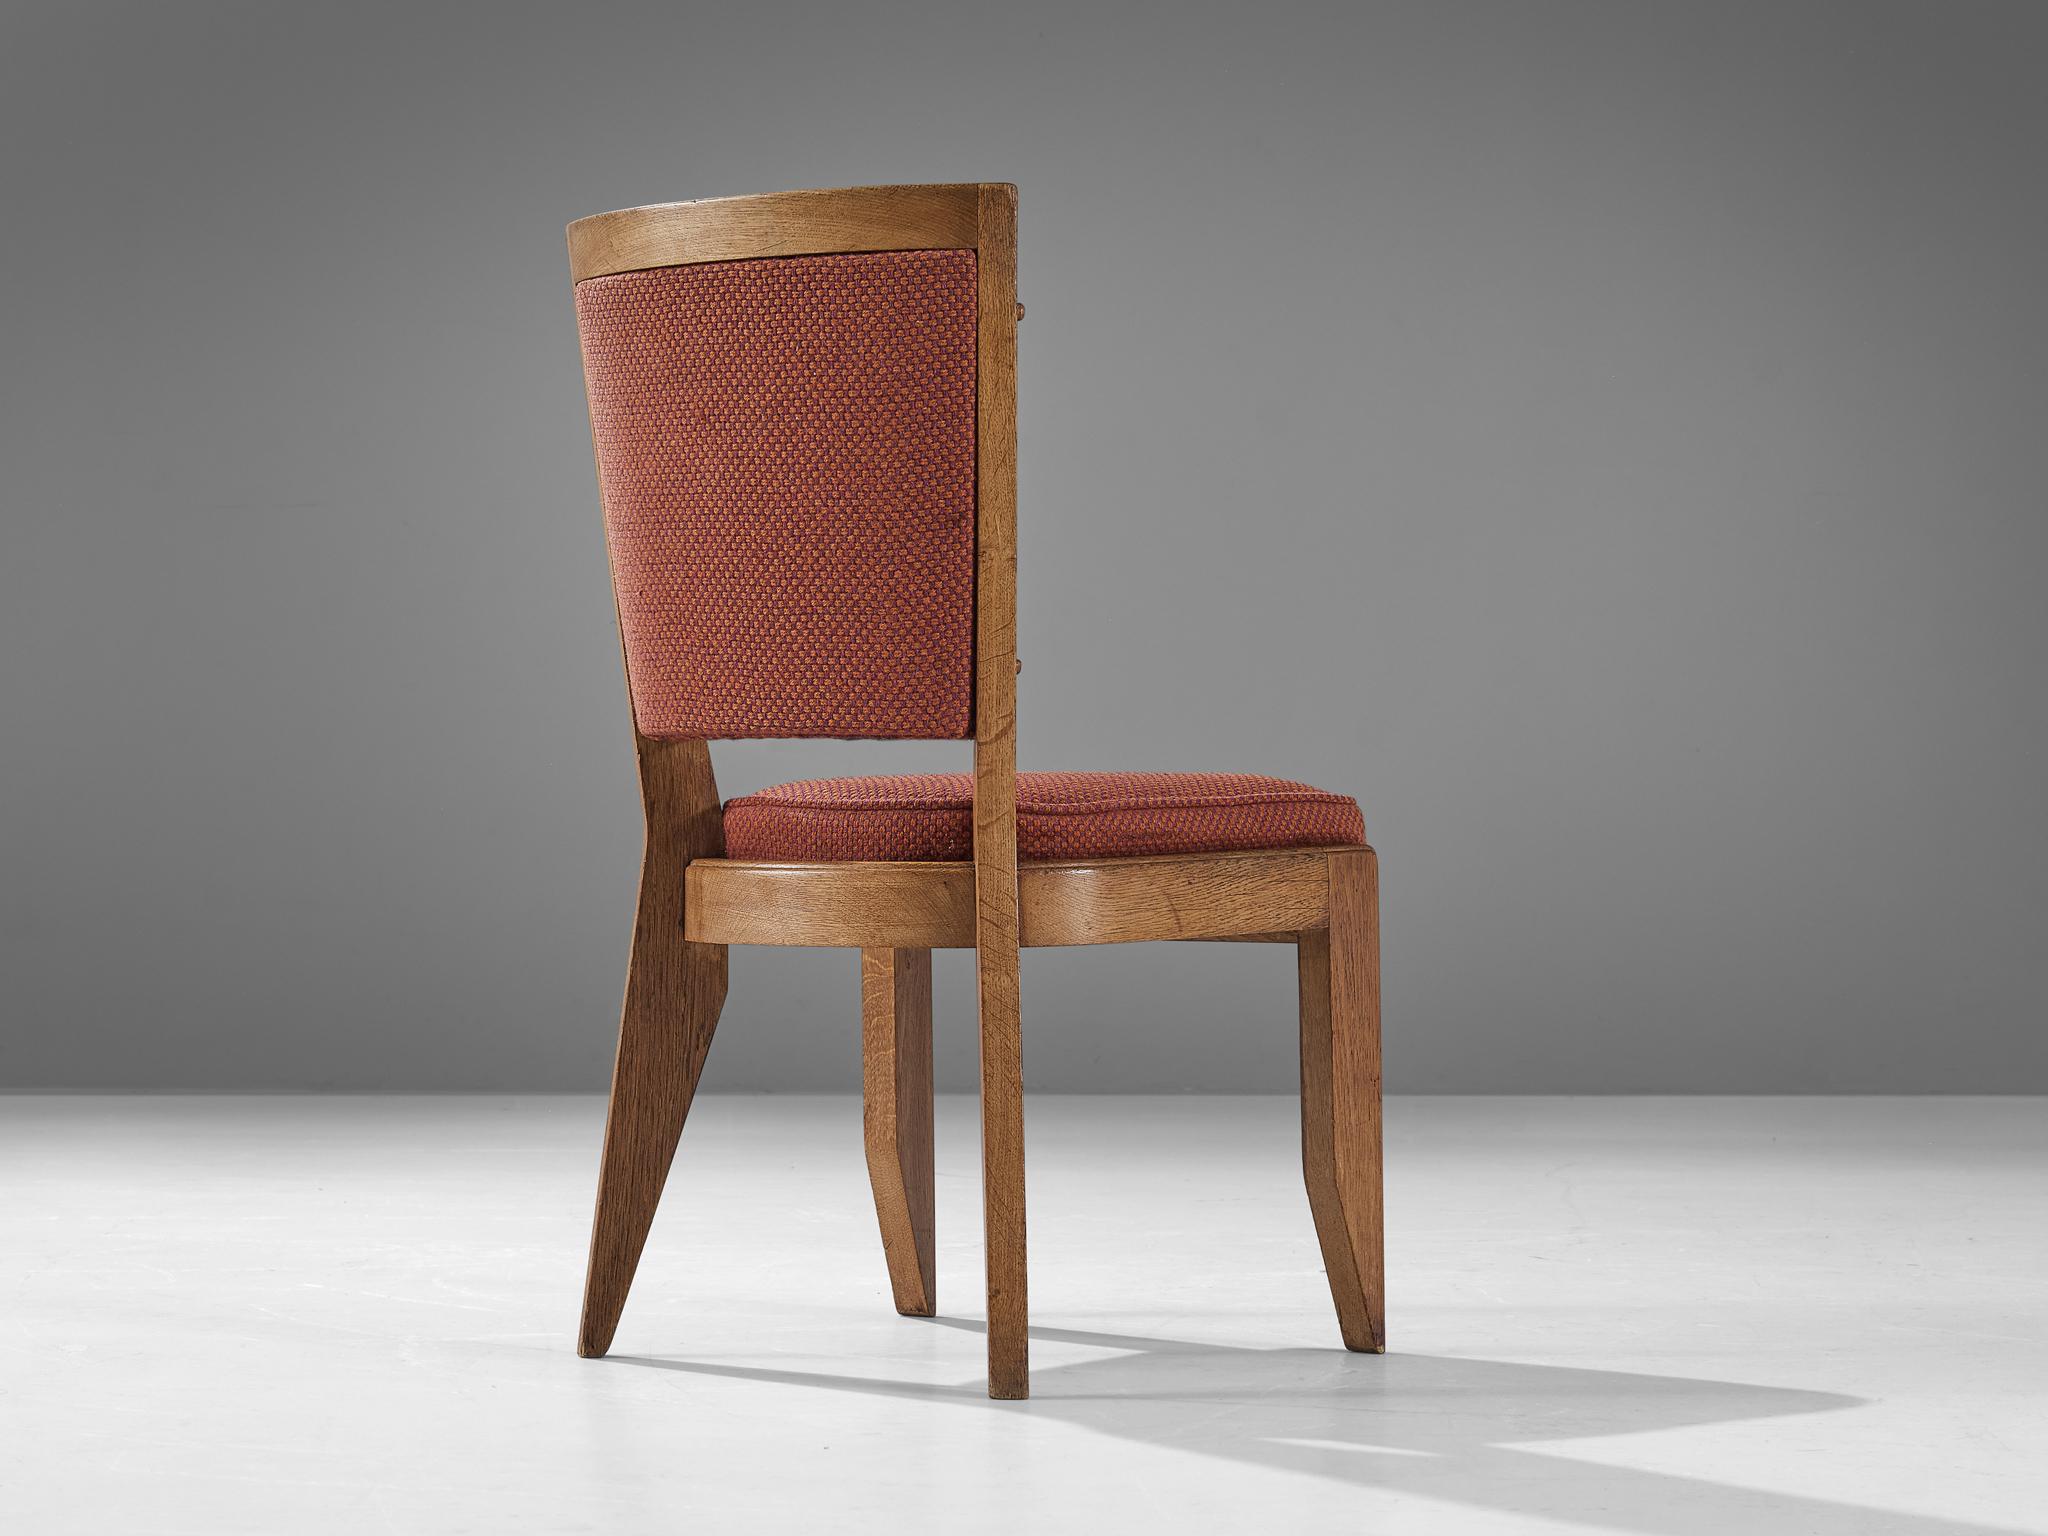 Guillerme et Chambron, dining chair, oak, fabric, France, 1960

This dining chair in solid oak is designed by the French designer duo Jacques Chambron and Robert Guillerme. This sturdy chair features beautiful sculptural legs and frame. The two